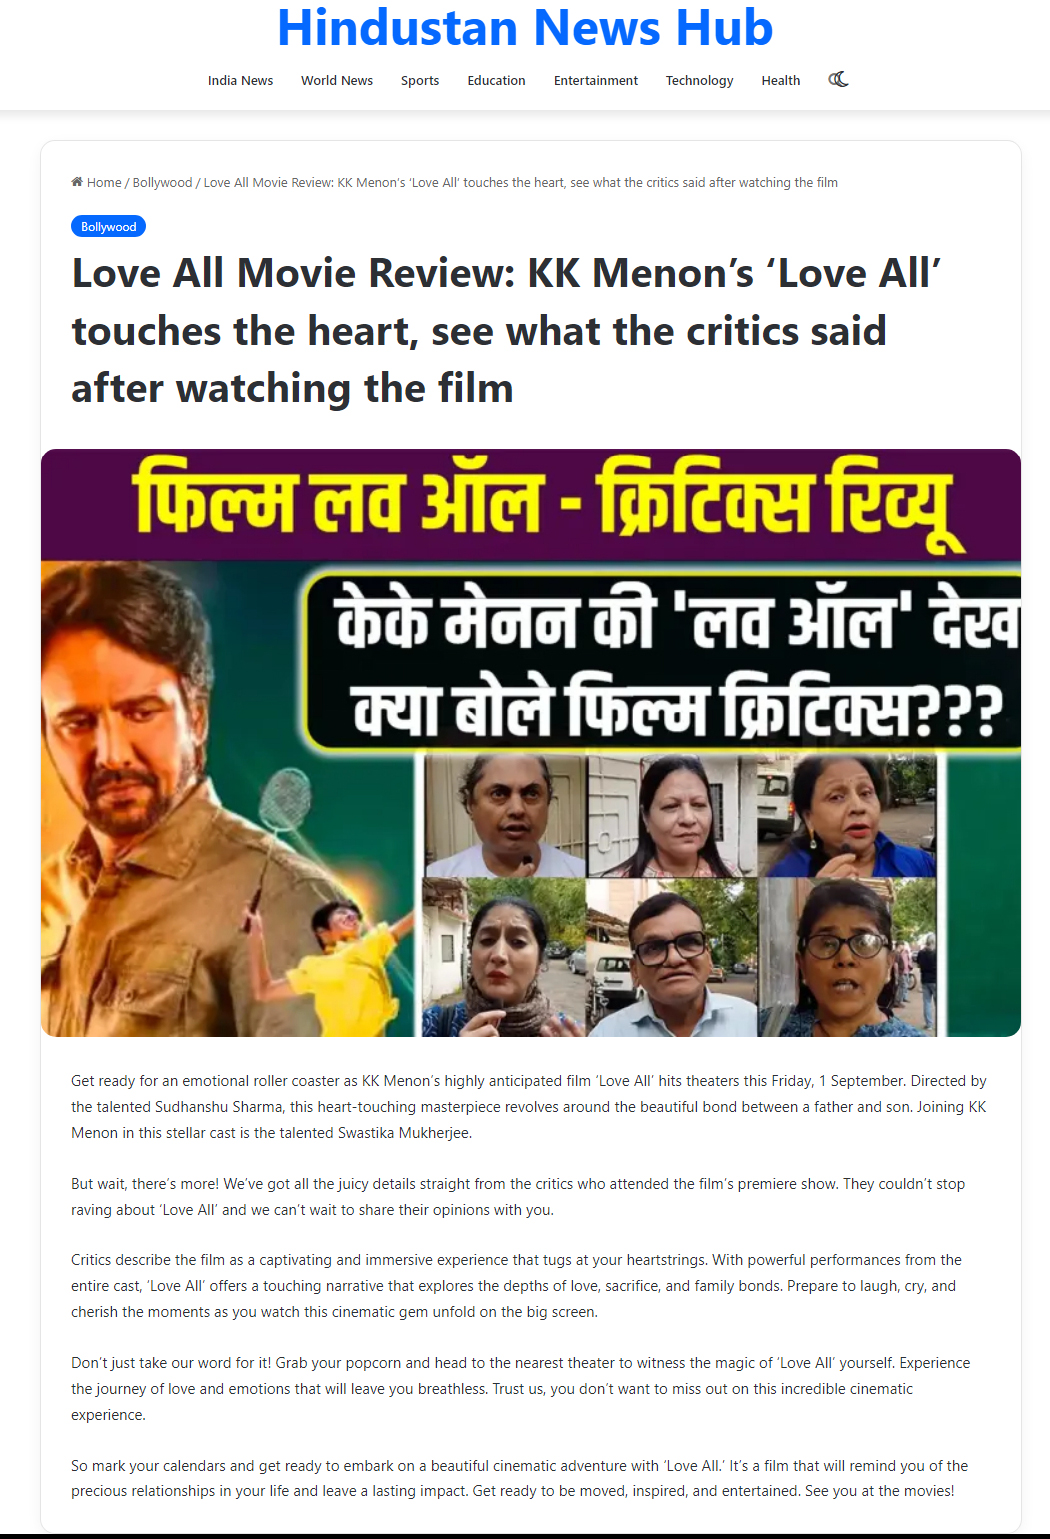 Love All Movie Review: KK Menon's 'Love All' touches the heart, see what the critics said after watching the film